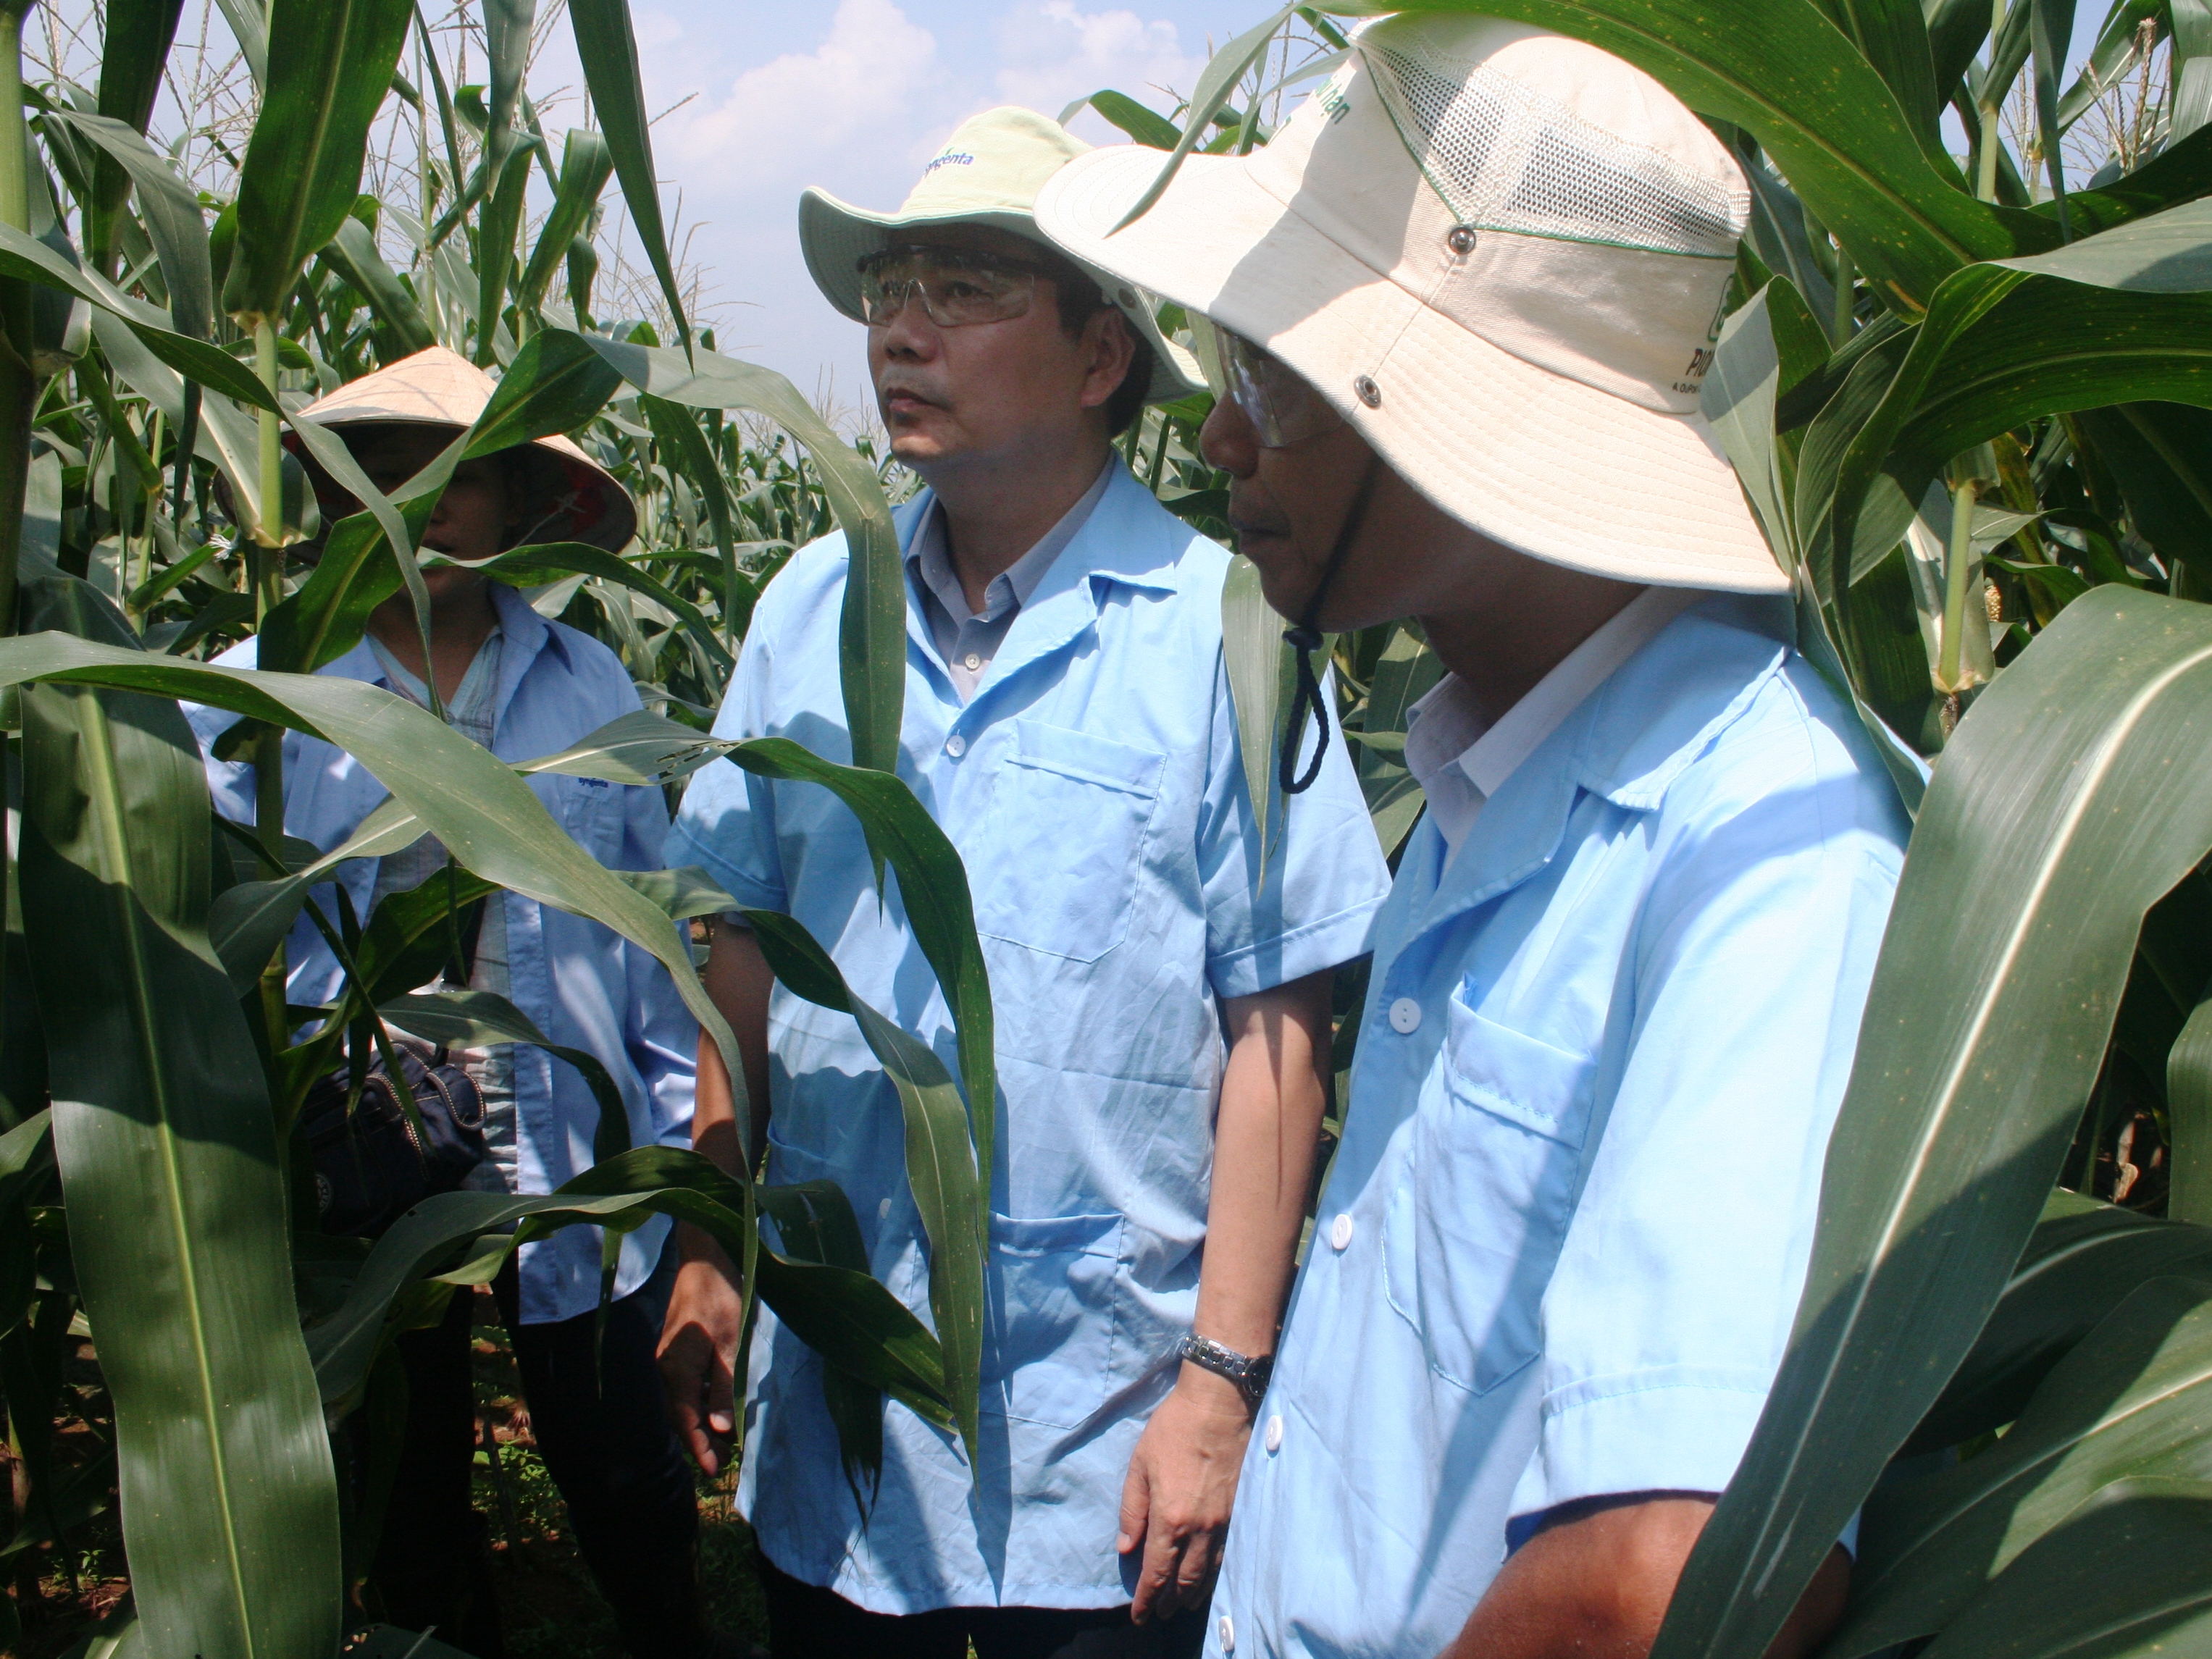 Minister of Agriculture and Rural Development, Cao Duc Phat, visited the Southeast Station